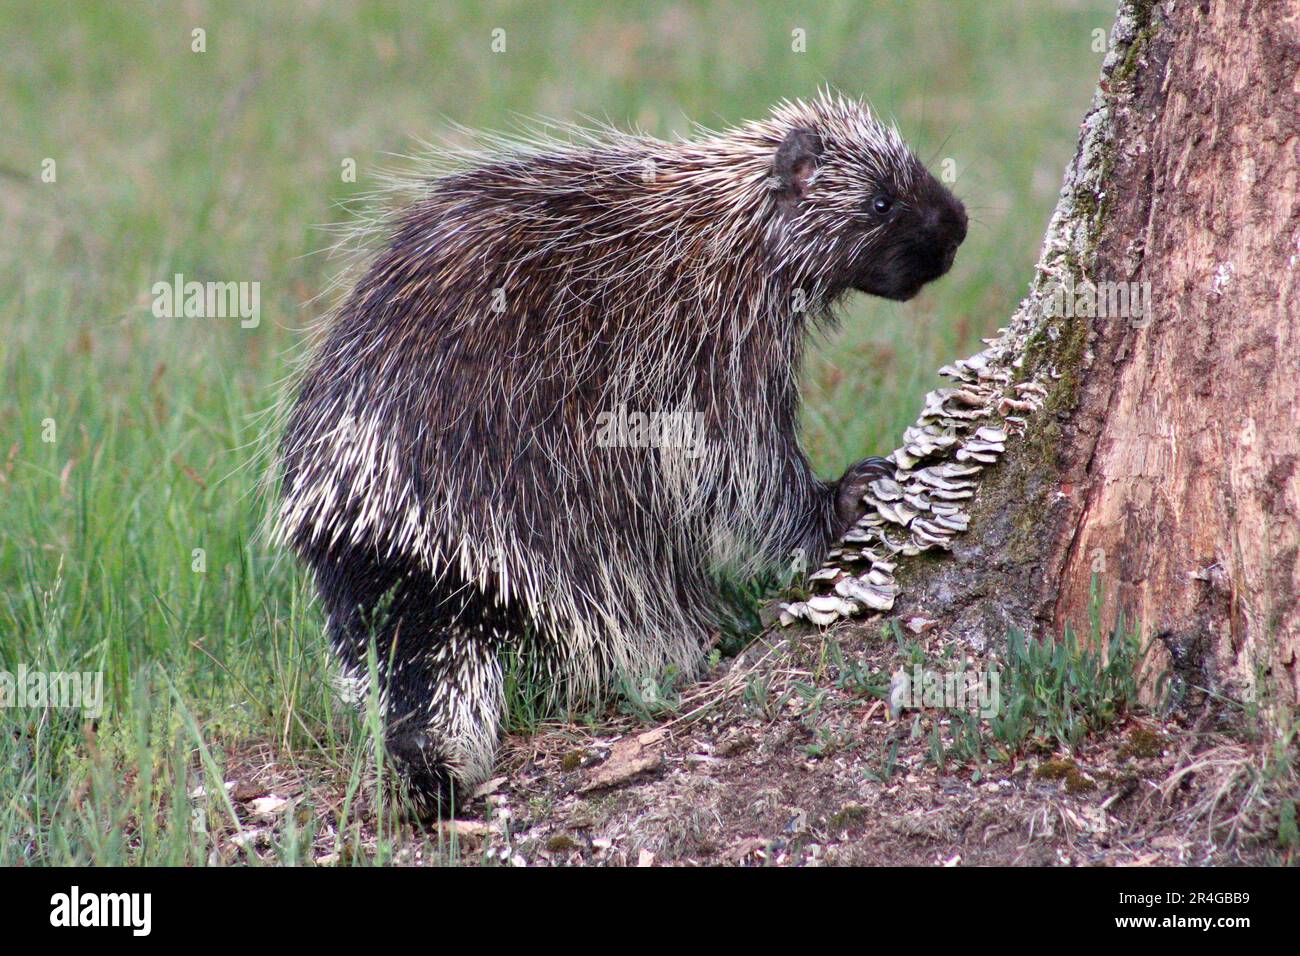 A Porcupine Looking For Food By A Dead Tree Stock Photo